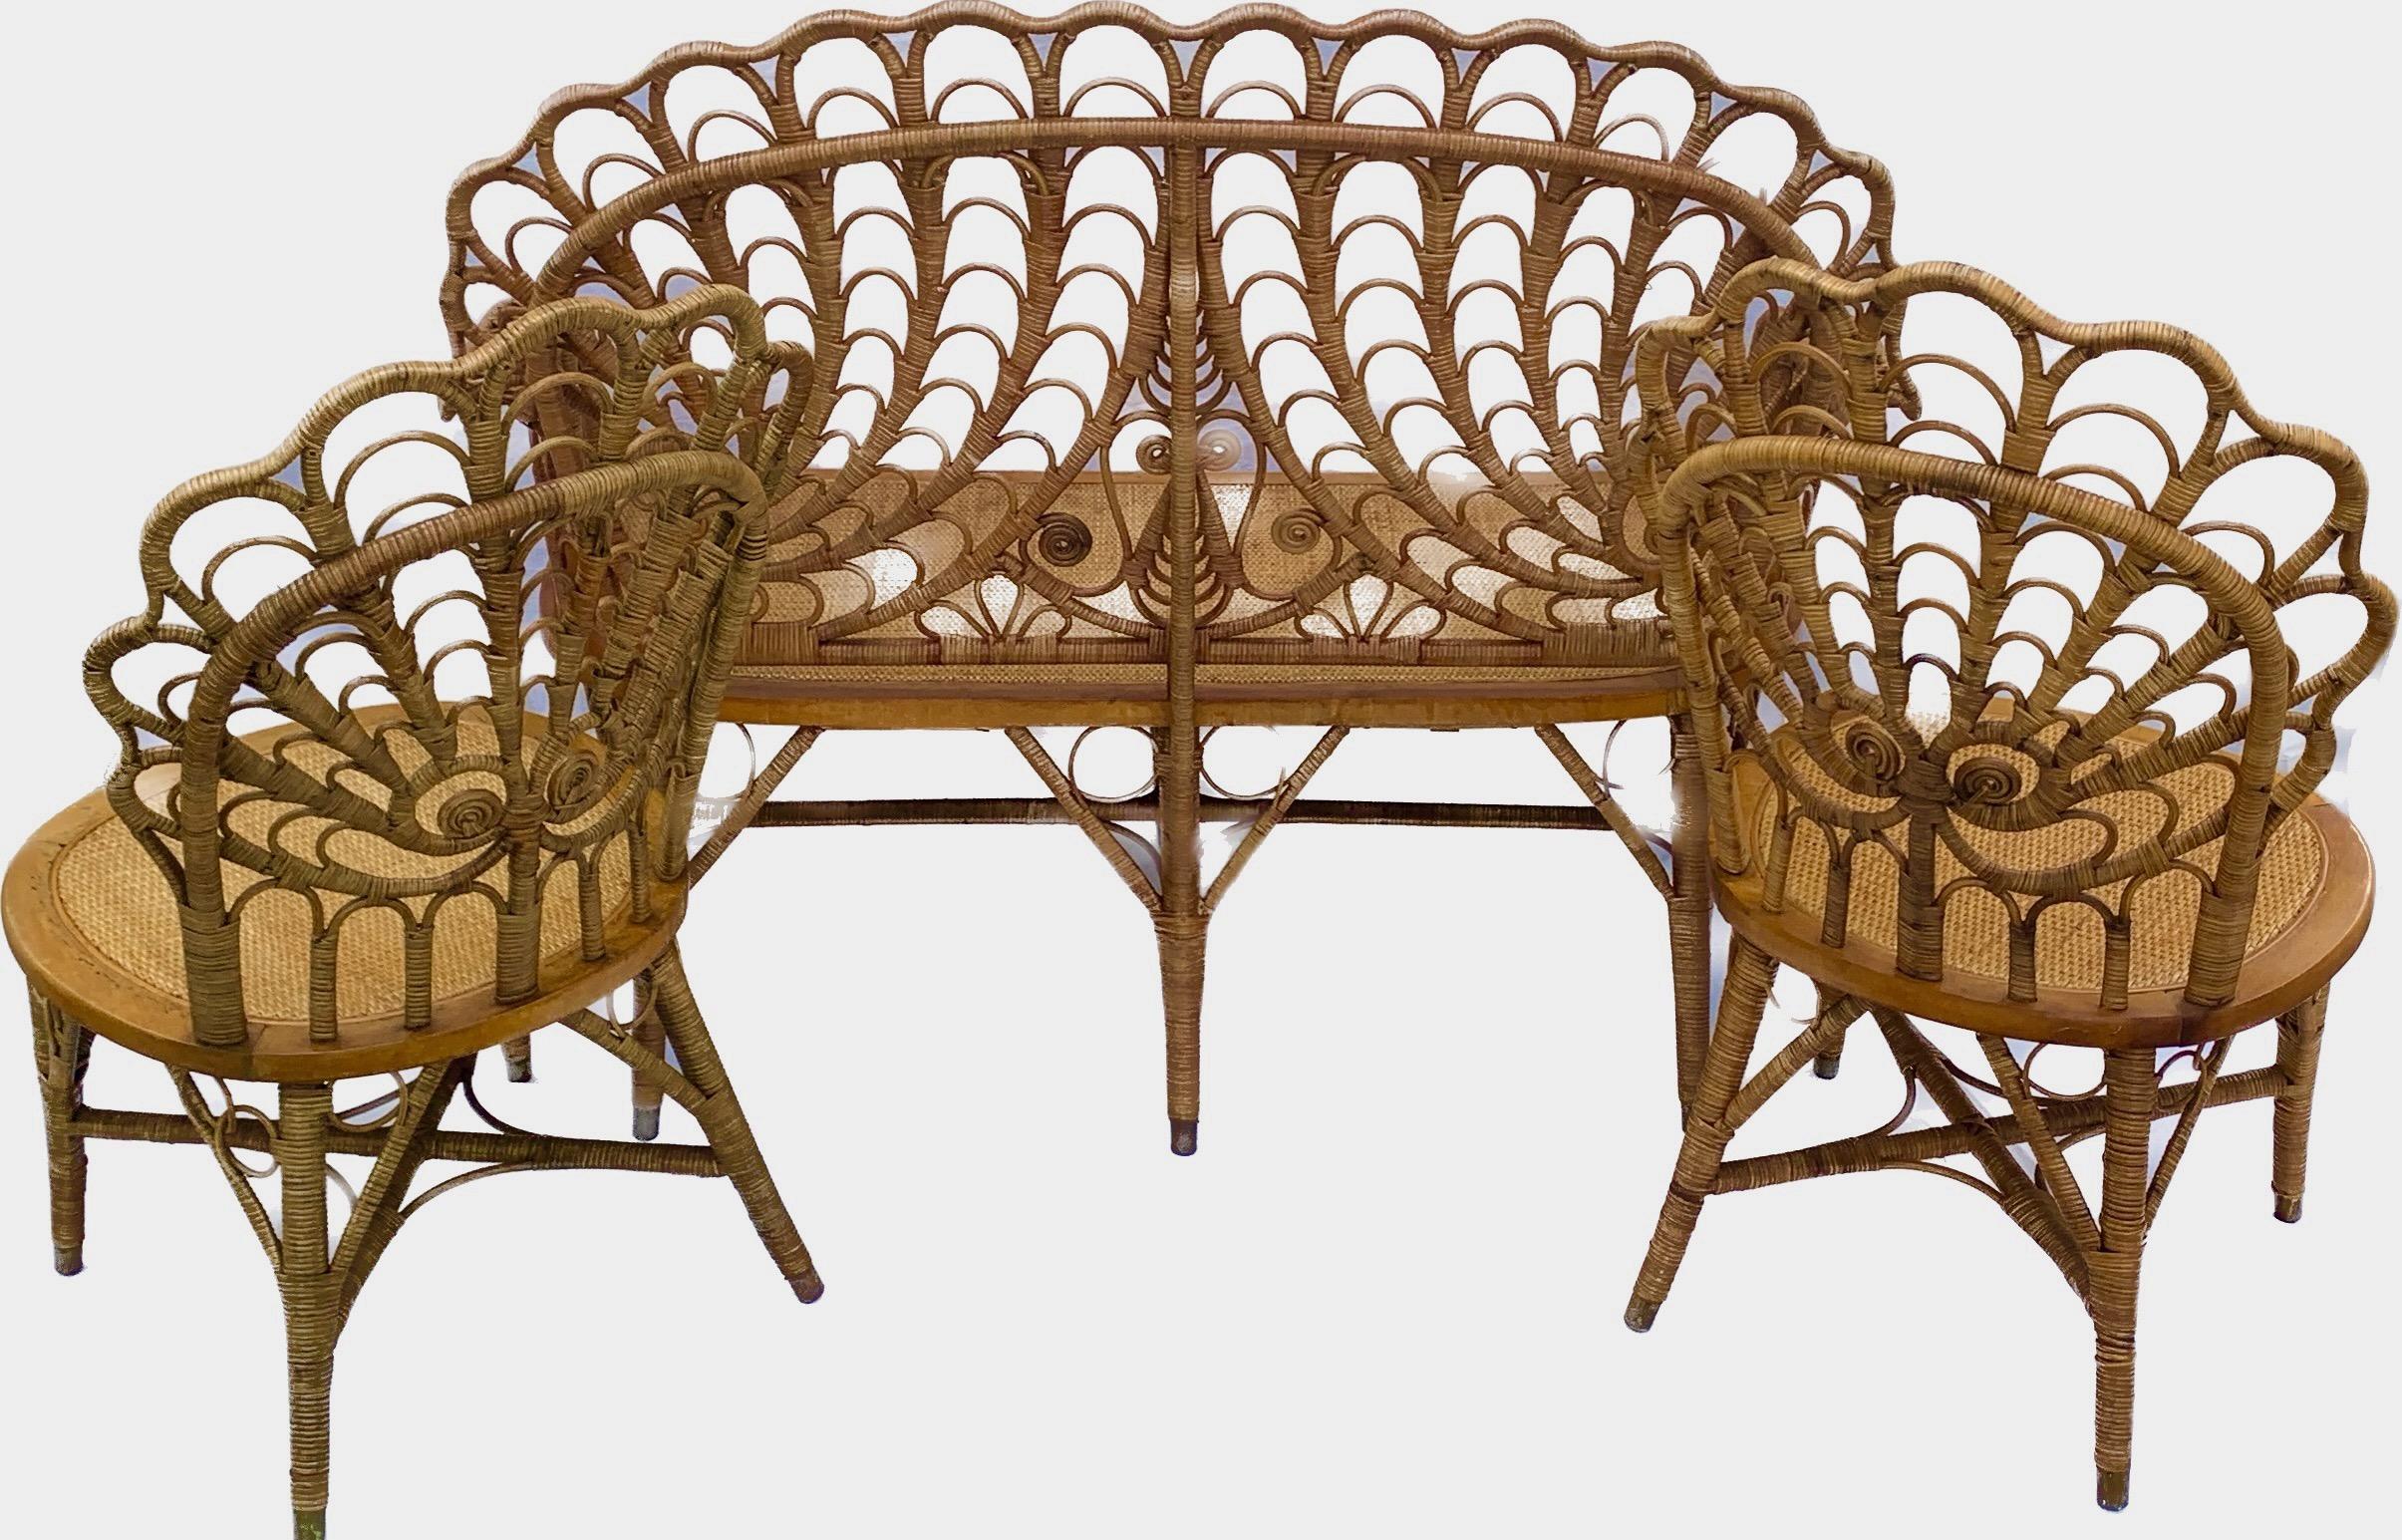 Hand-Woven 19th C. Antique Wicker Three Piece Shell Back Design Suite by Heywood Brothers